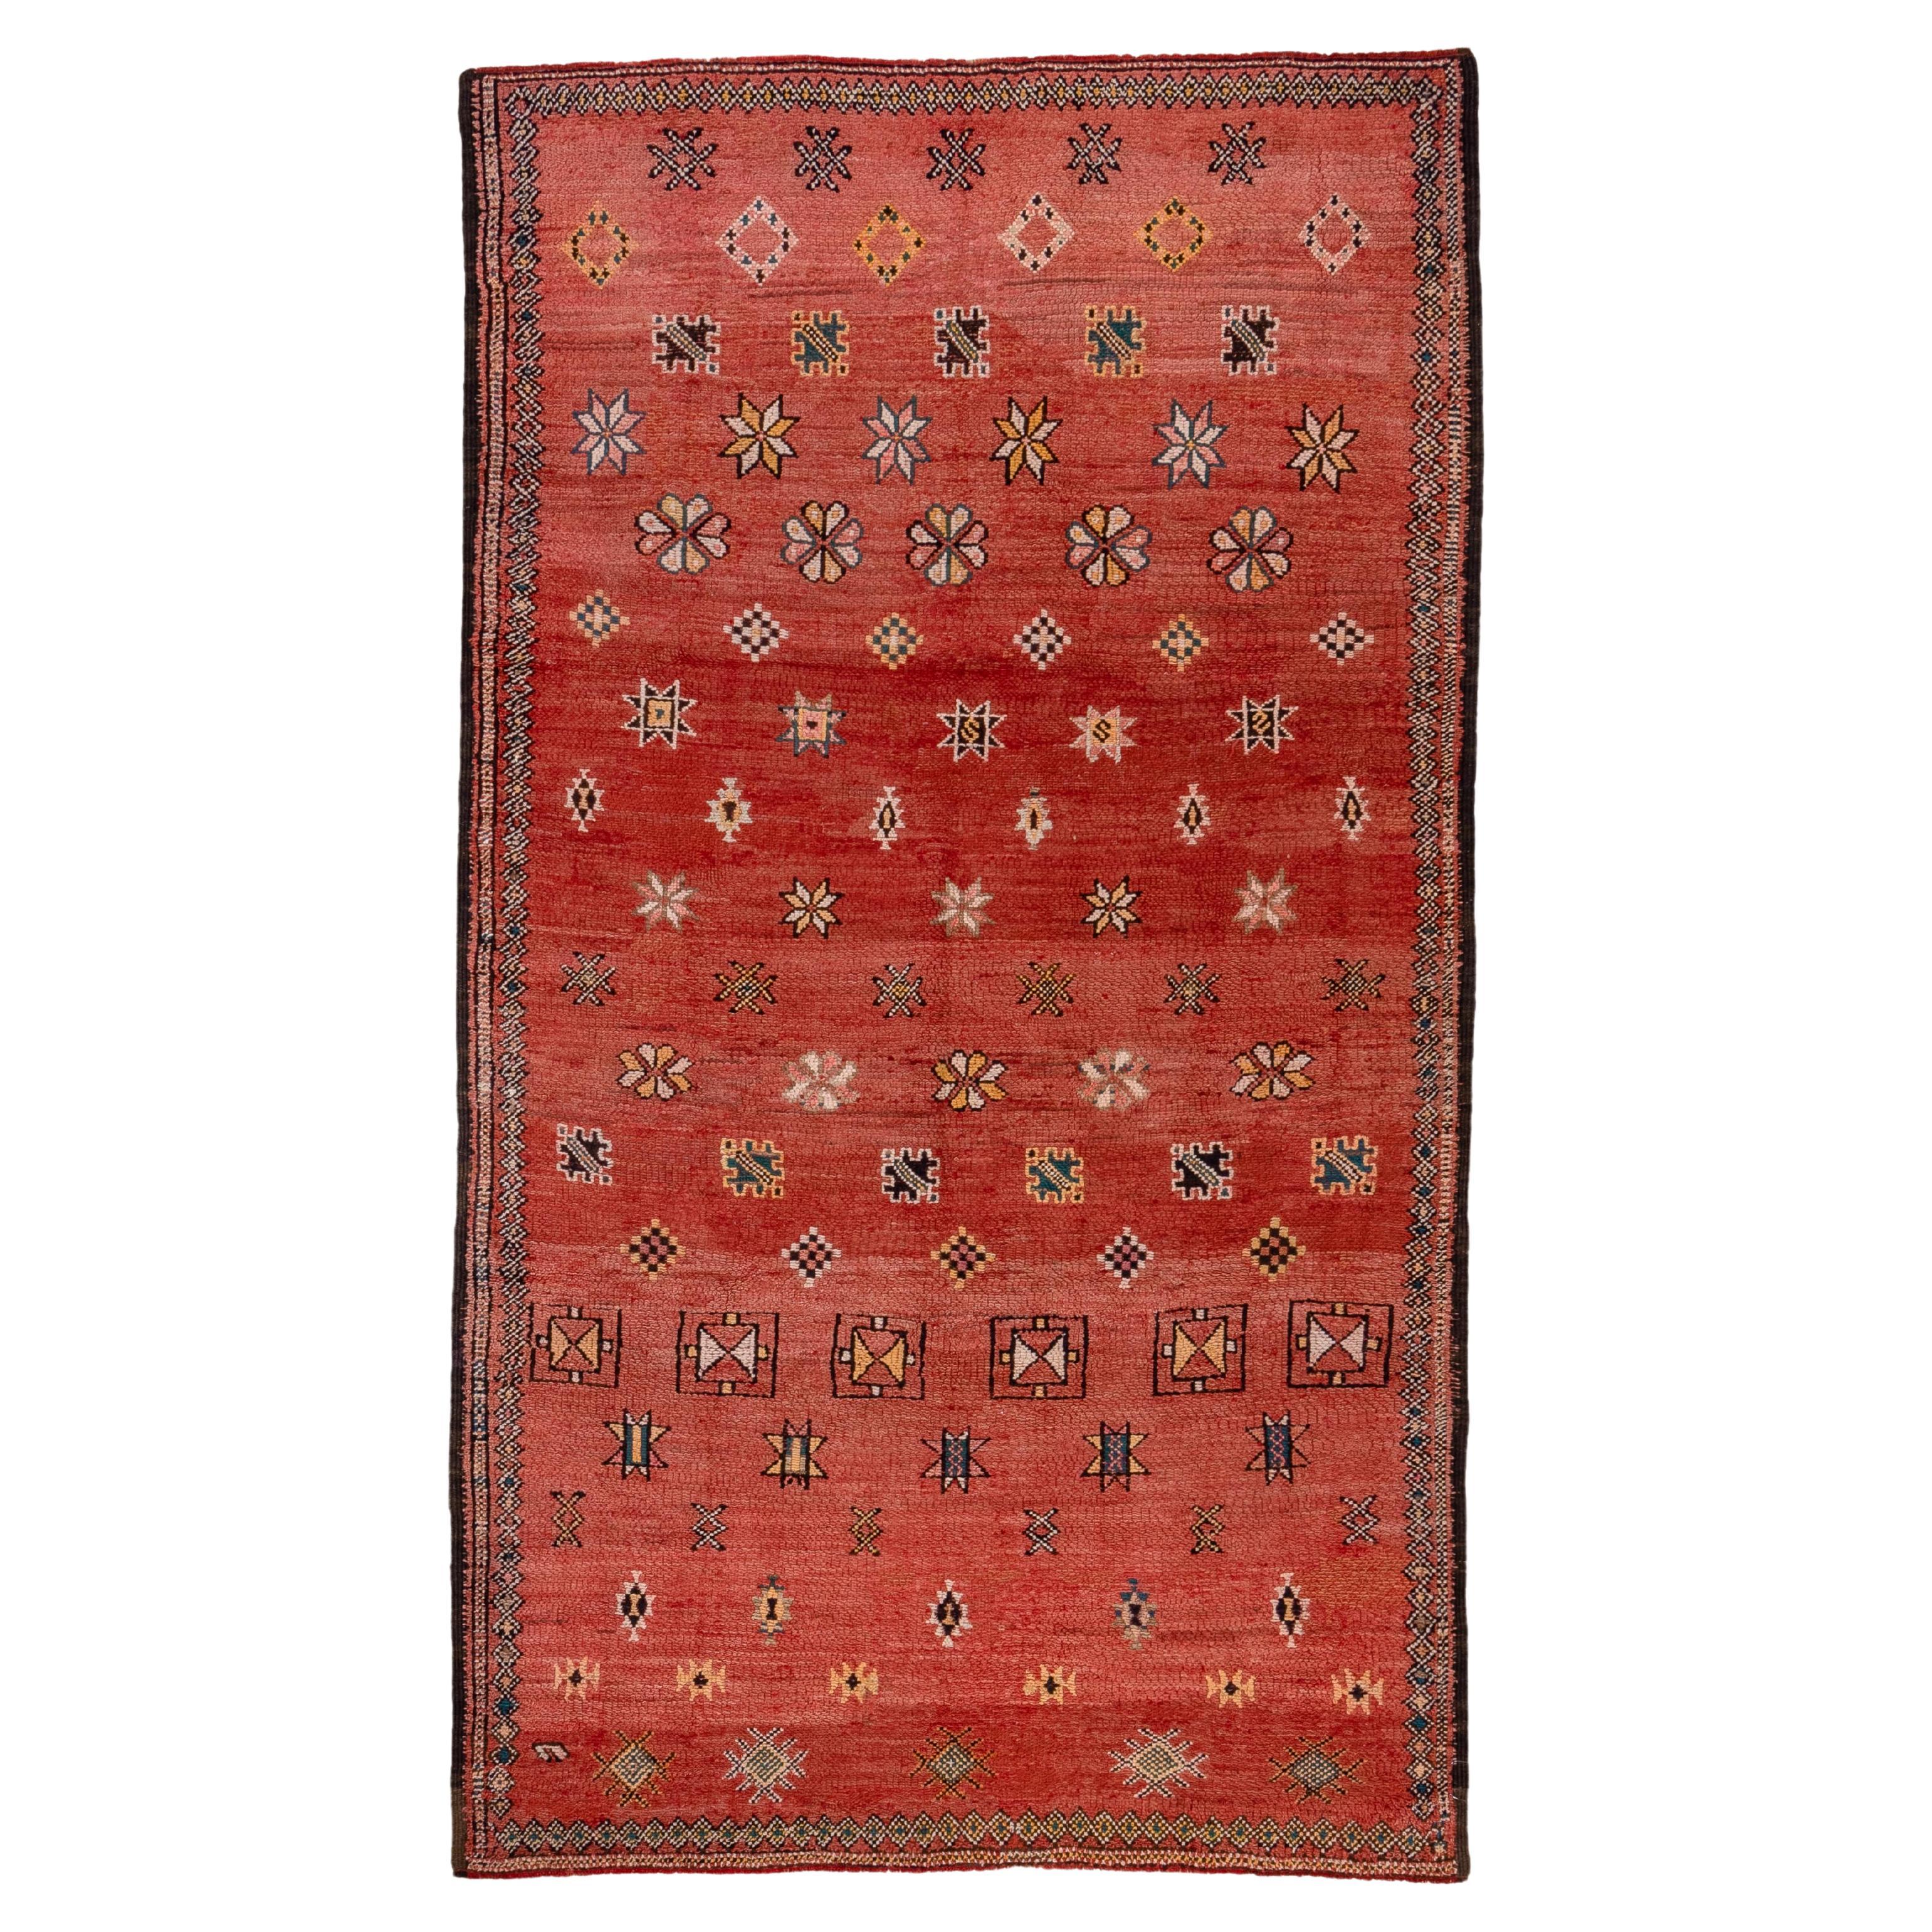 Floral Starred Allover Rug in Soft Red with Orange Pink Accented Trim